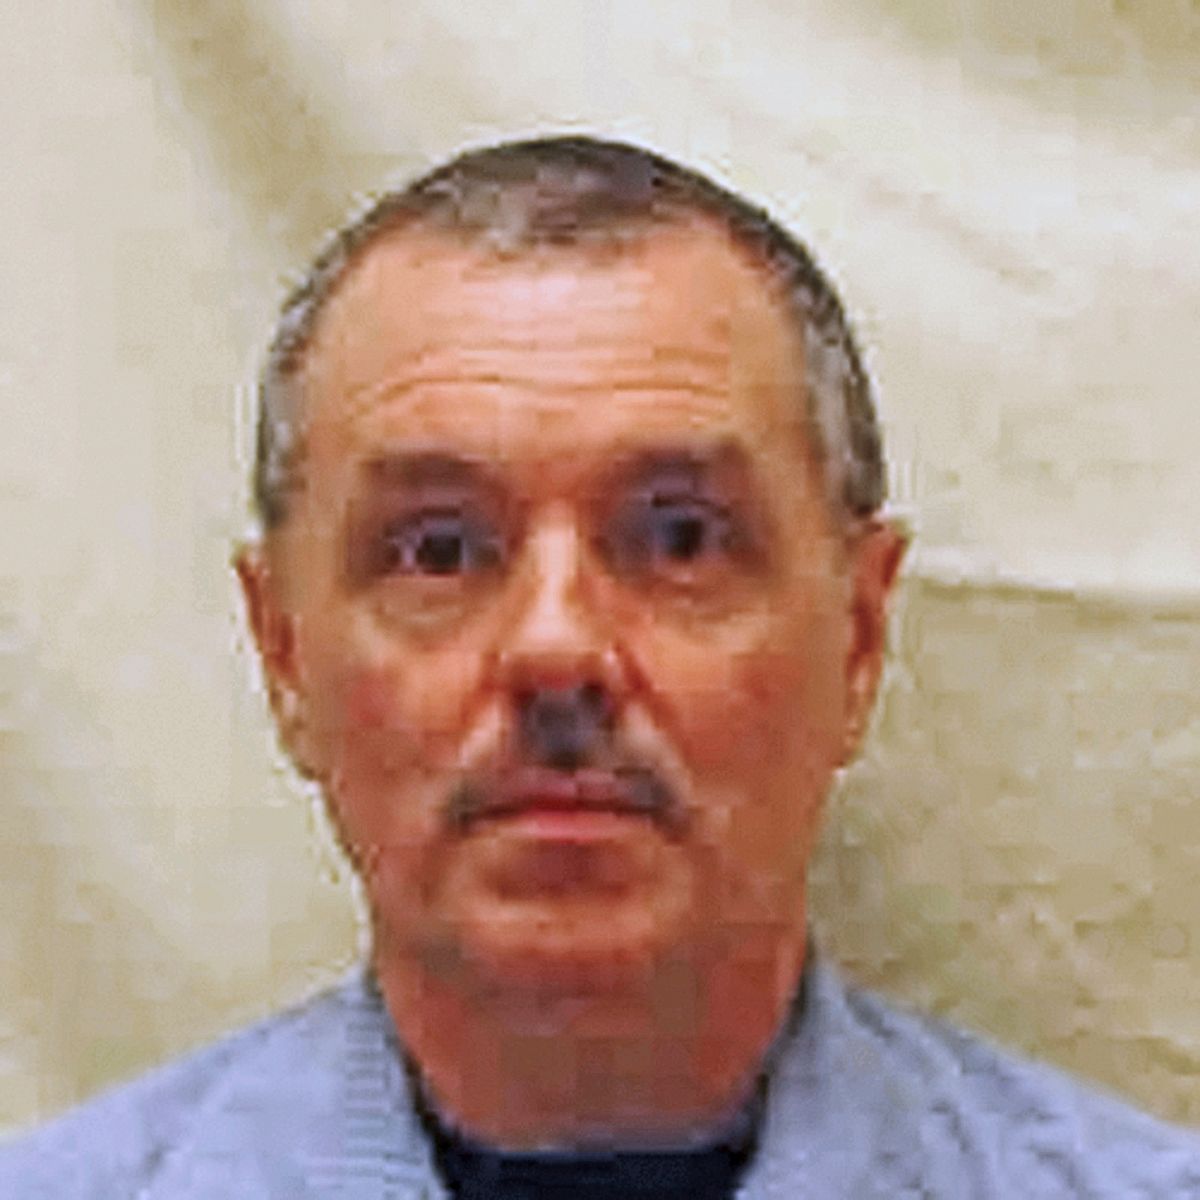 This photo provided by the Ohio Department of Rehabilitation and Correction shows Donald Harvey, a serial killer who became known as the "Angel of Death" and pleaded guilty in 1987 to 37 murders of hospital patients while working as a nurse's aide in Cincinnati and London, Kentucky, during the 1970s and '80s, claiming he was trying to end his patients' suffering. A spokeswoman for Ohio's prison system says Harvey was found badly beaten Tuesday, March 28, 2017, in his cell at the state's prison in Toledo, and the Ohio State Highway Patrol said Harvey was in critical condition Wednesday. He is serving multiple life sentences as part of a plea deal that avoided the death penalty. (Ohio Department of Rehabilitation and Correction via AP) (AP)